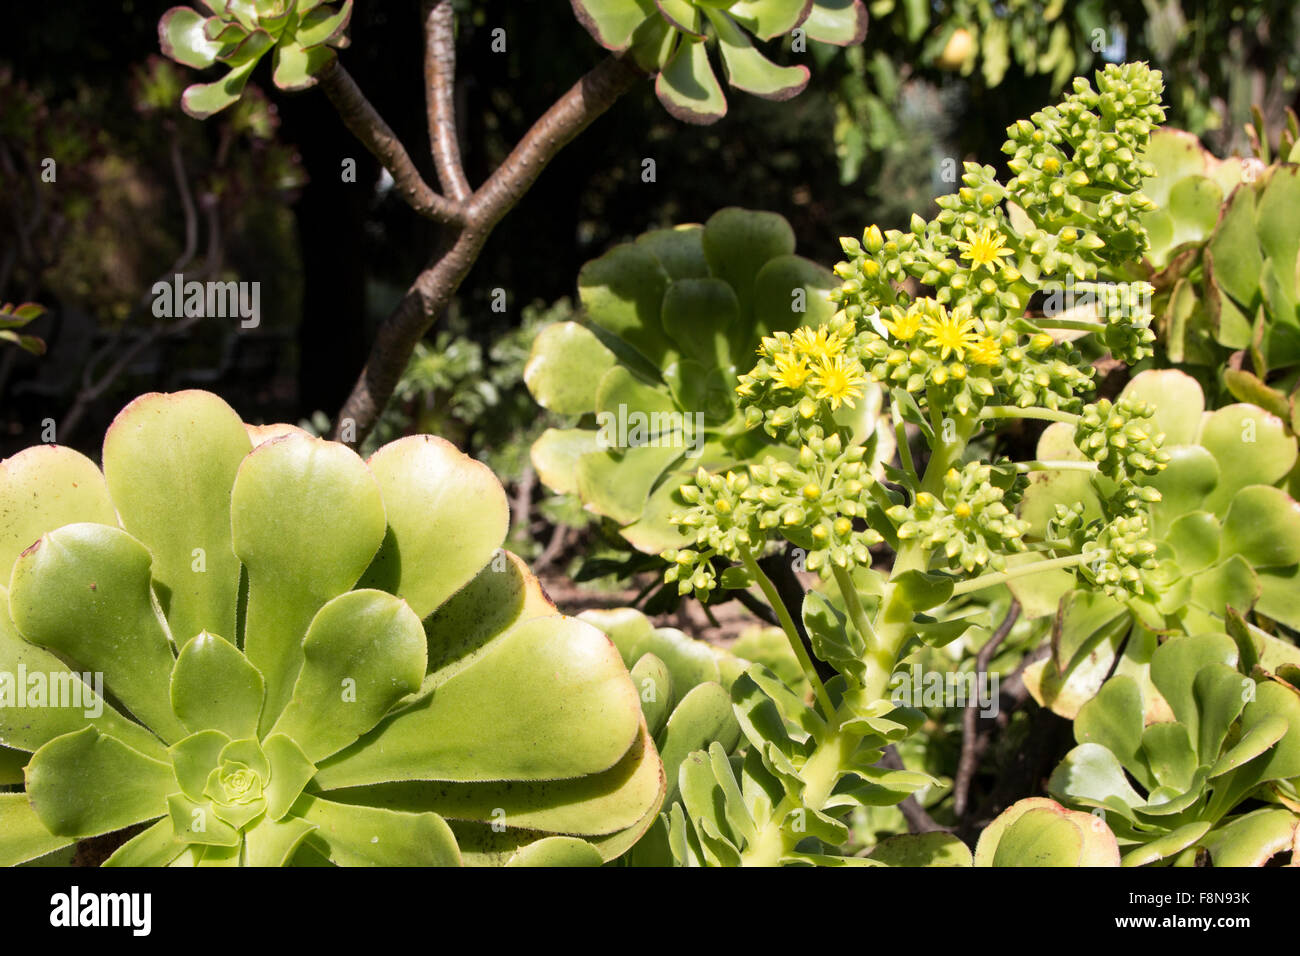 Aeonium canariense is a species of Aeonium, one of the few aeoniums with hairs all over the thick leaves. It tends to grow along Stock Photo